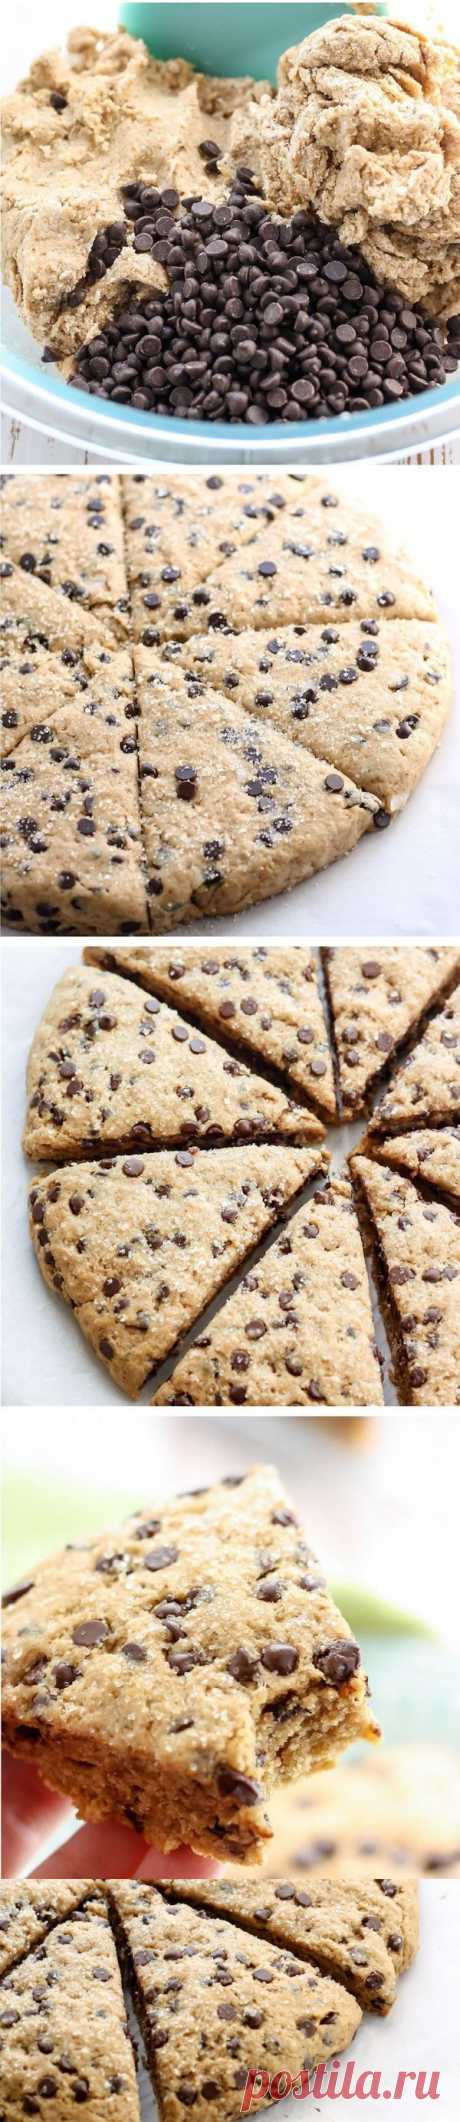 Vegan Whole Wheat Chocolate Chip Scones 2 1/2 tsp Baking powder. 1/2 cup Chocolate chips, dairy free mini. 1/4 cup Coconut sugar. 2 cups Flour* (or whole wheat pastry flour, whole wheat white. 1/2 tsp Salt. 1 Turbinado/coarse sugar. 1 tsp Vanilla extract. 1/2 cup Coconut oil, frozen. 1 cup Canned coconut milk (lite or full-fat both work.